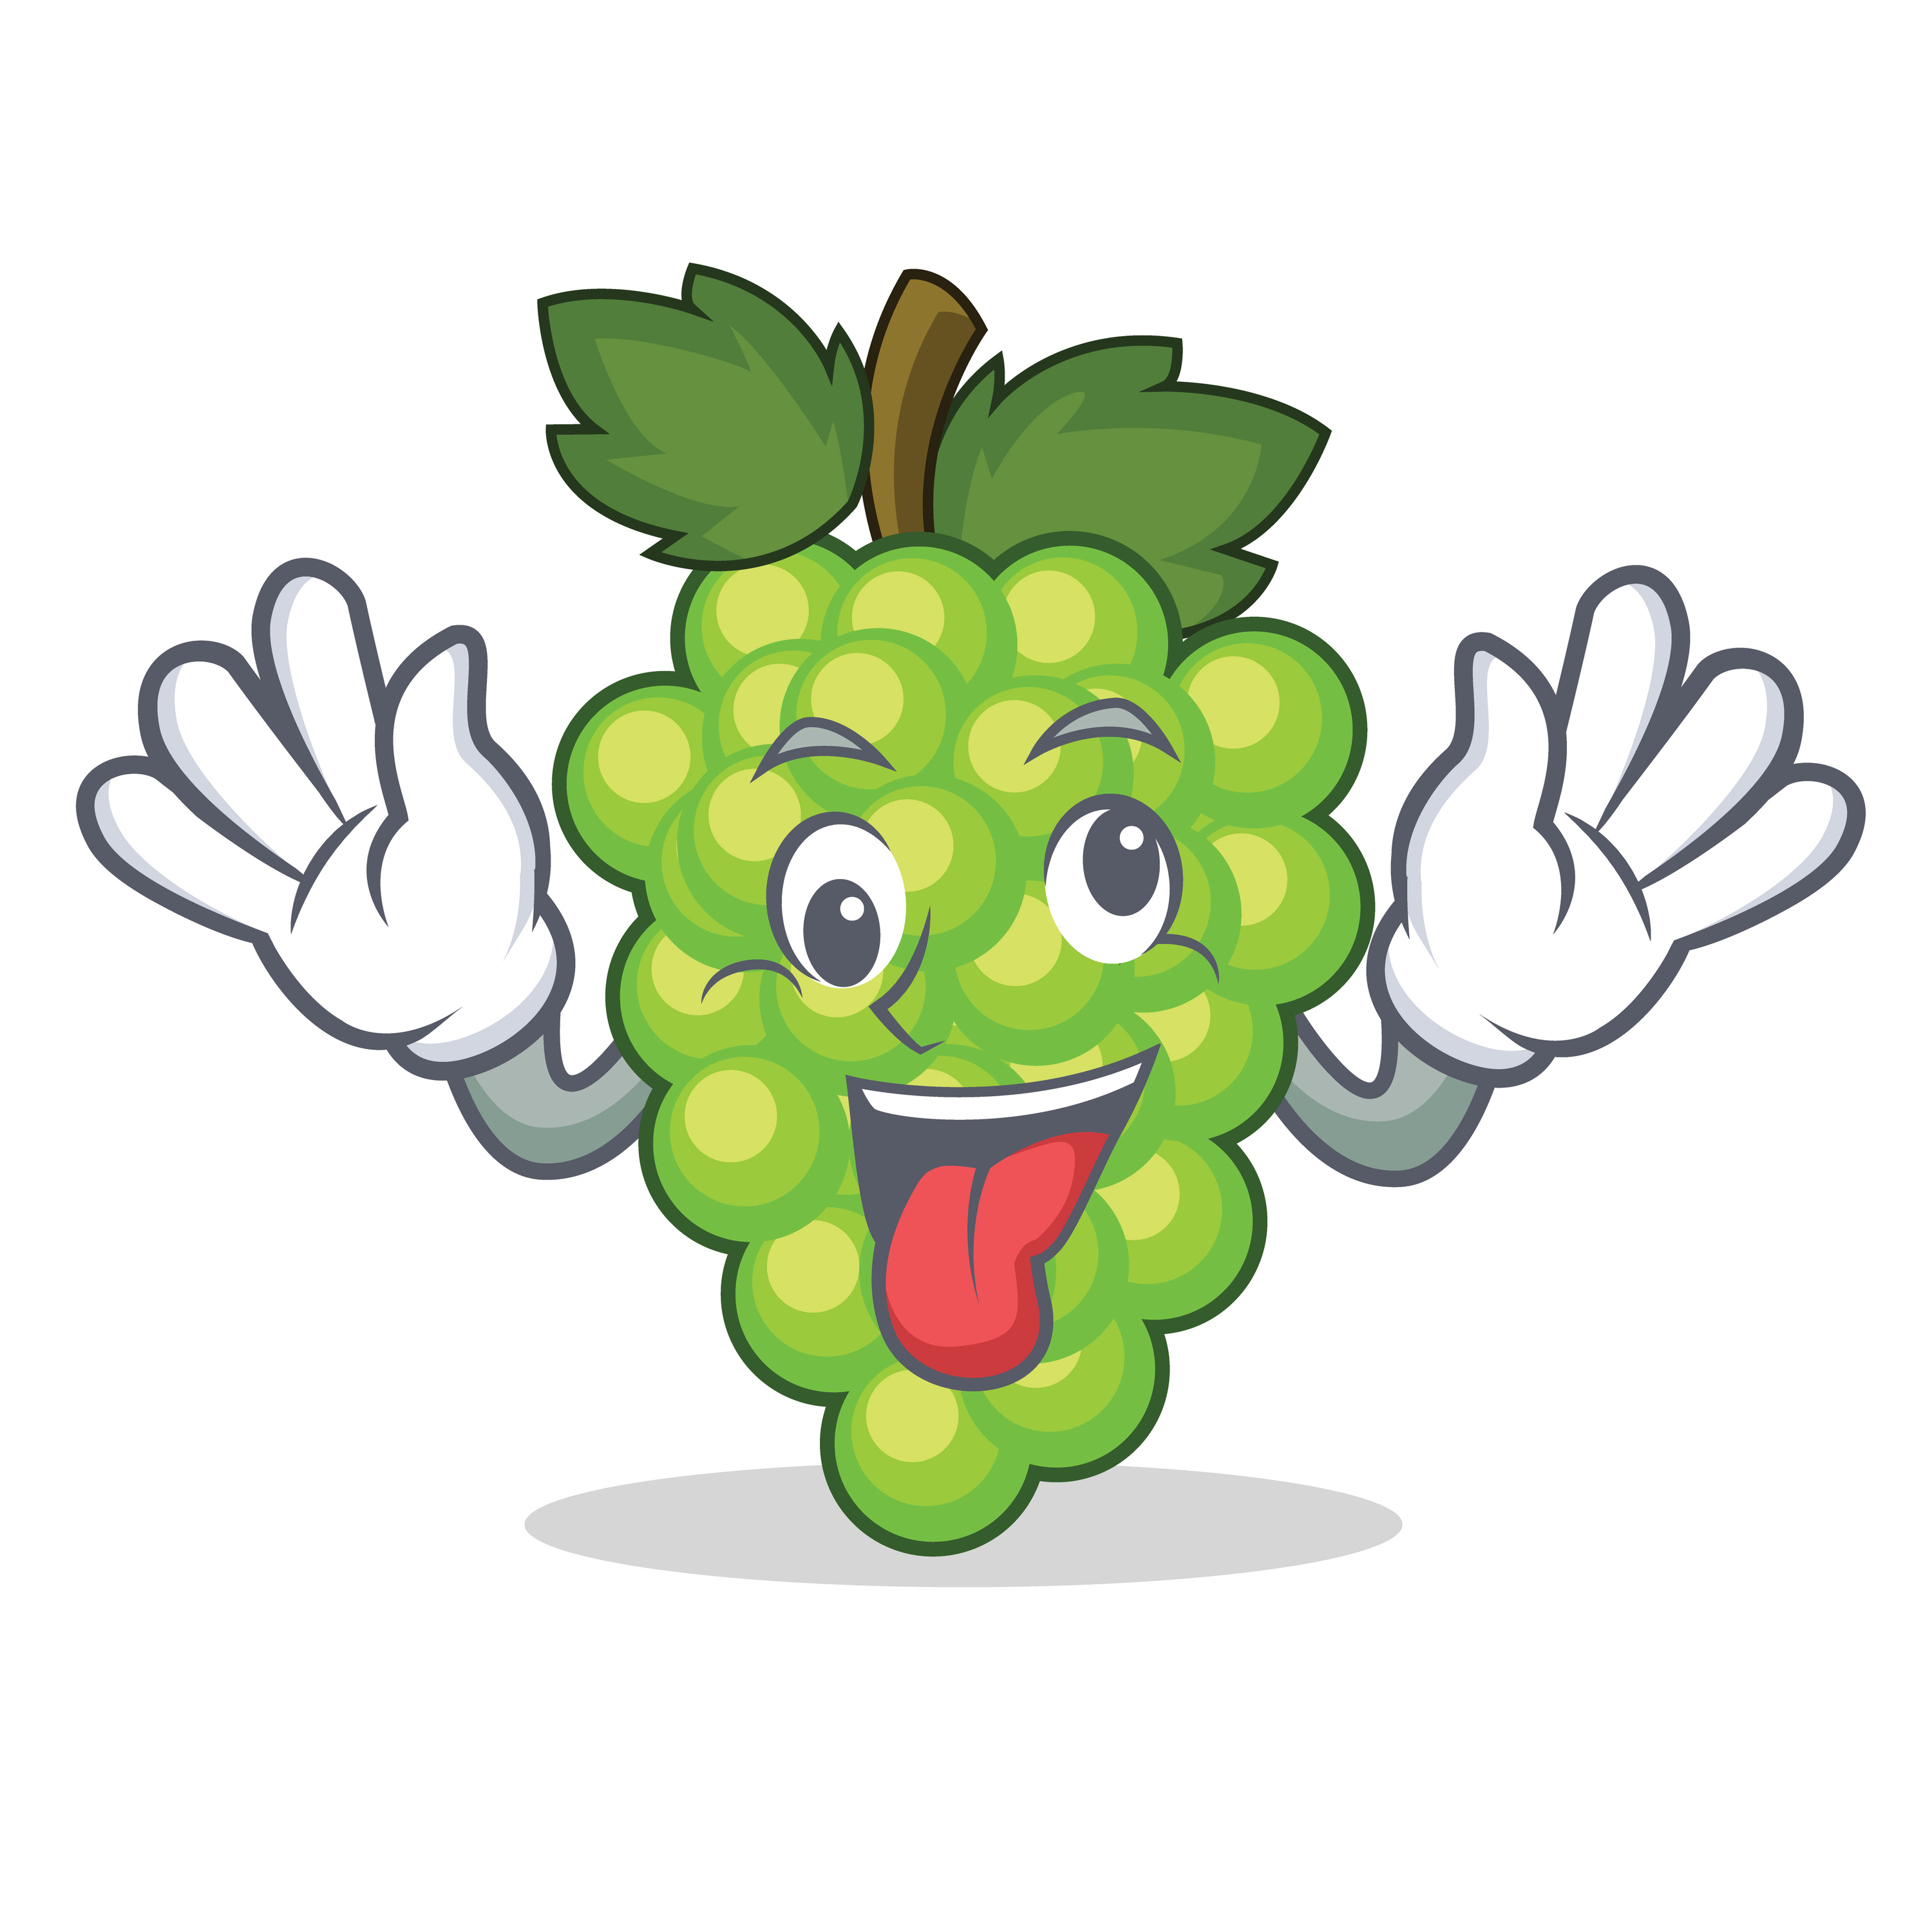 a cartoon of green grapes with a face and a hand up